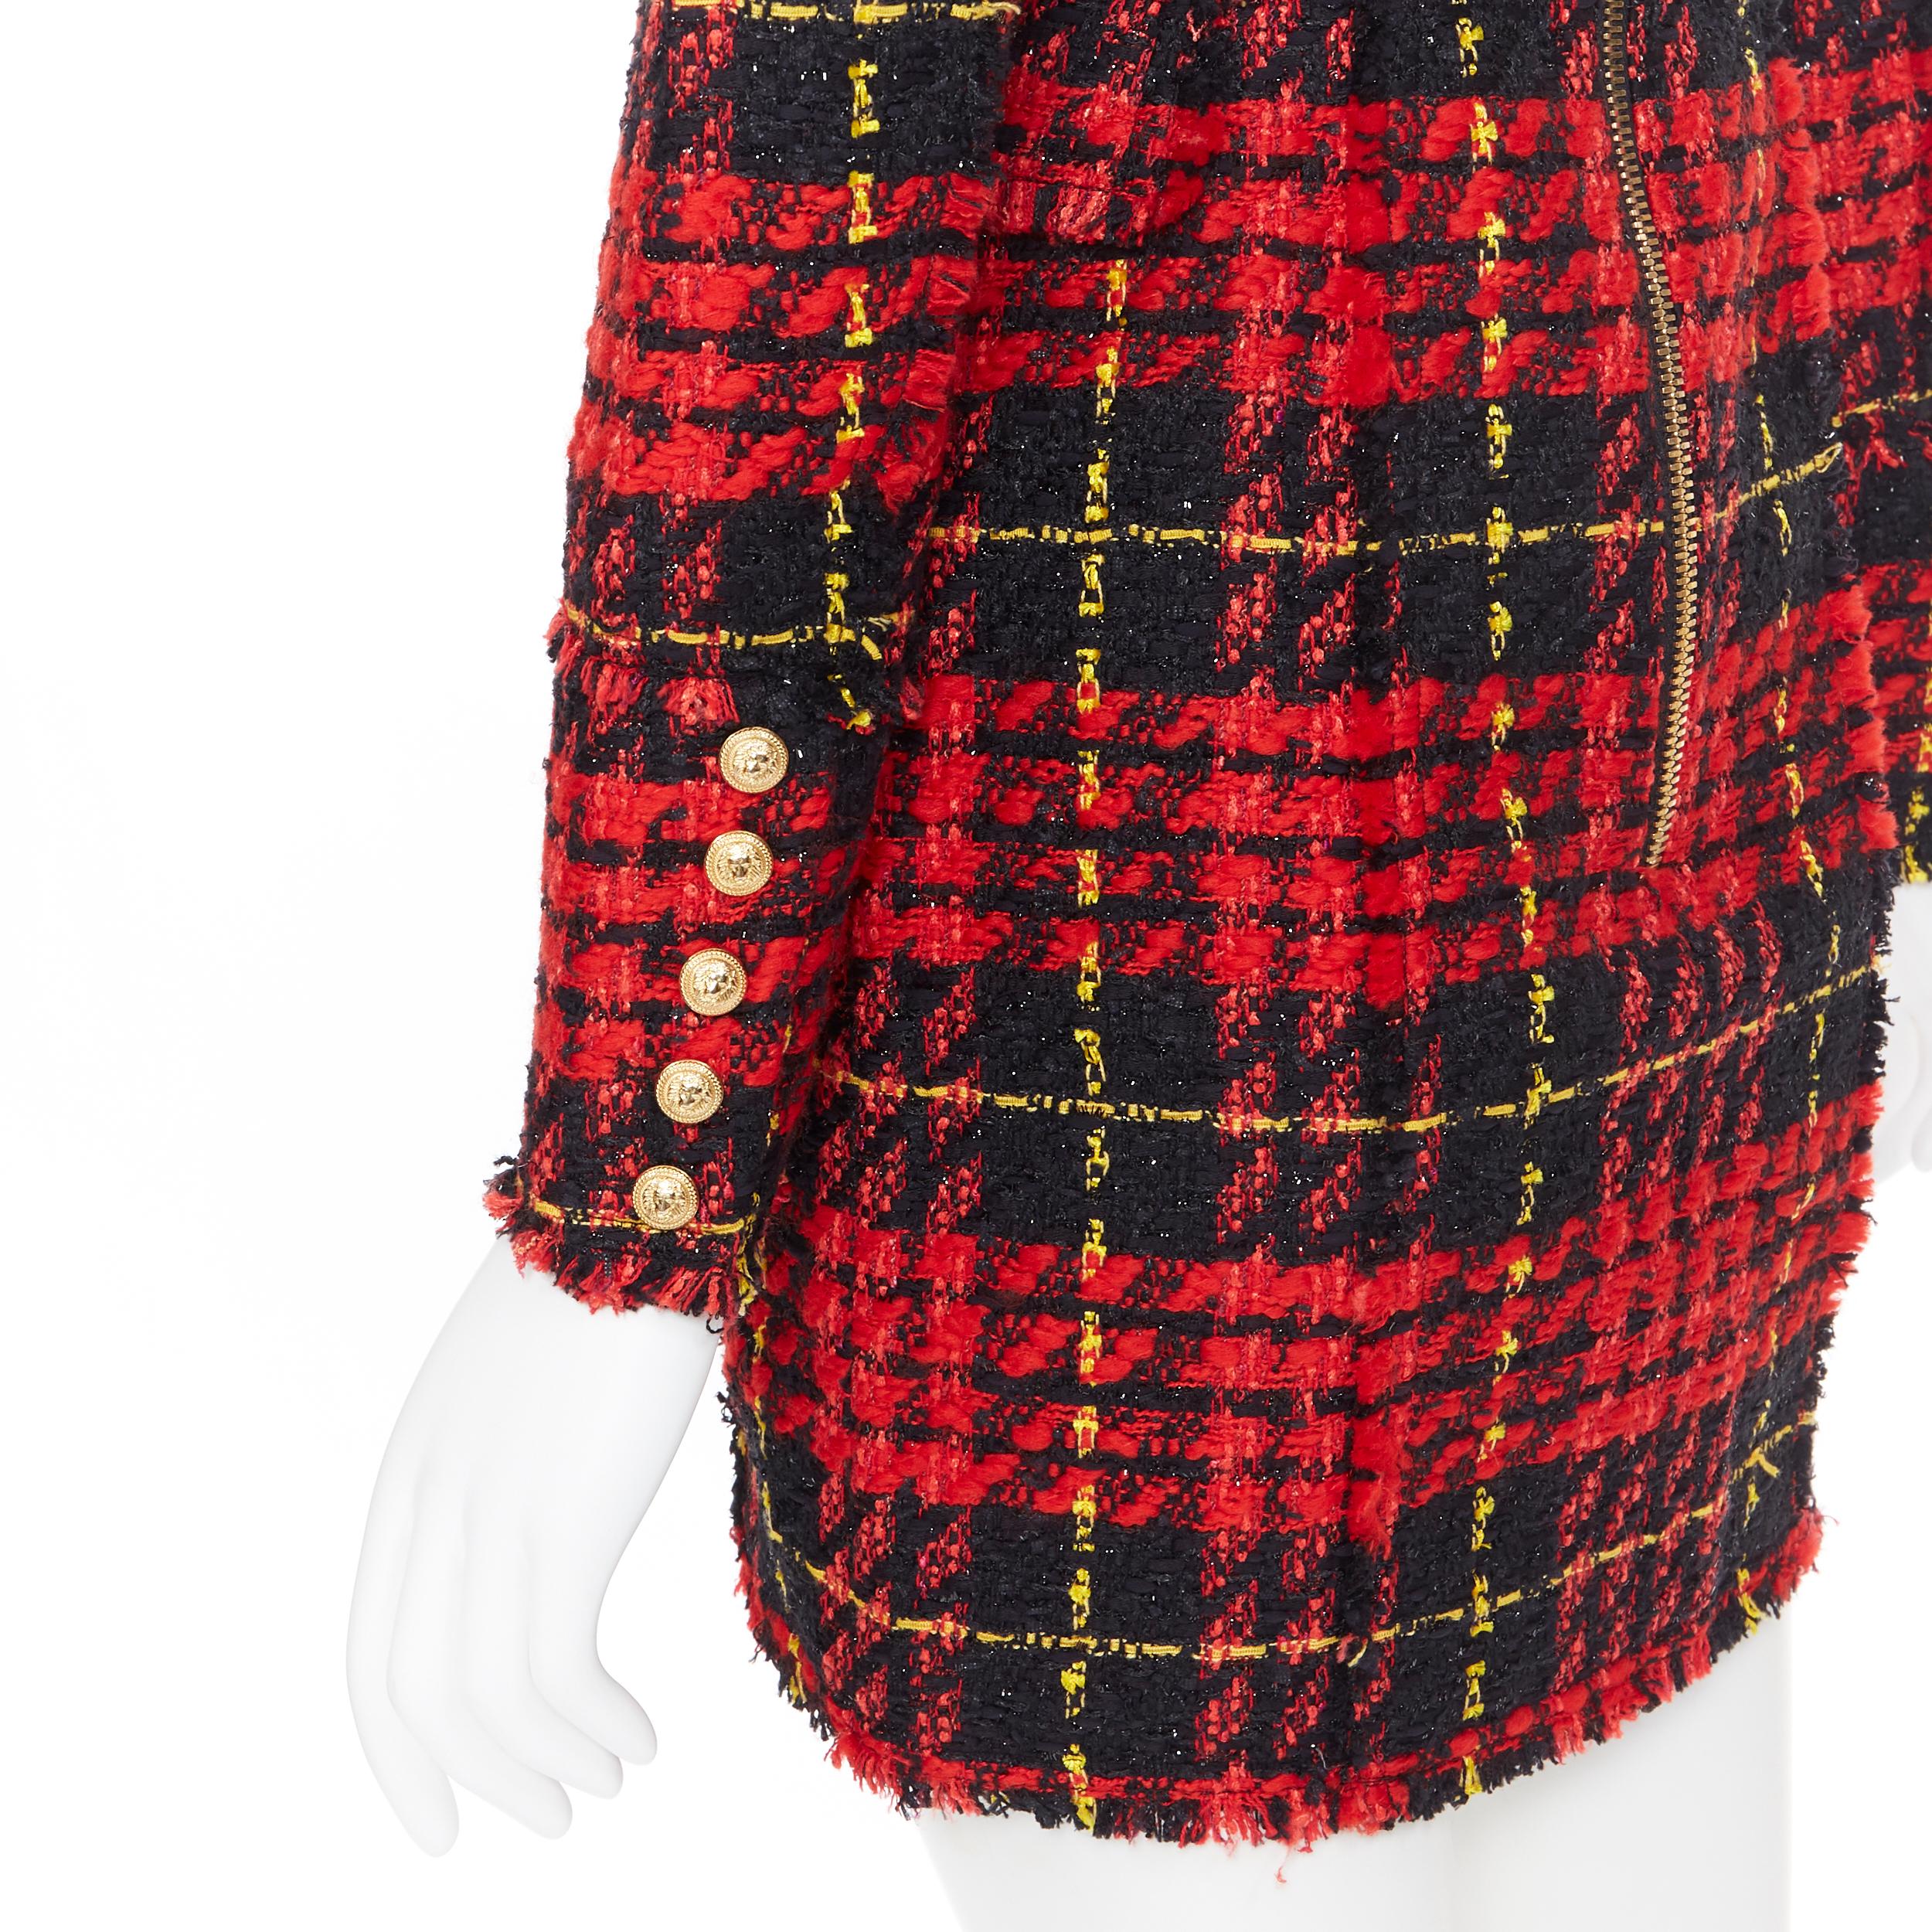 new BALMAIN Runway red black checked tweed double breasted military dress FR34 1